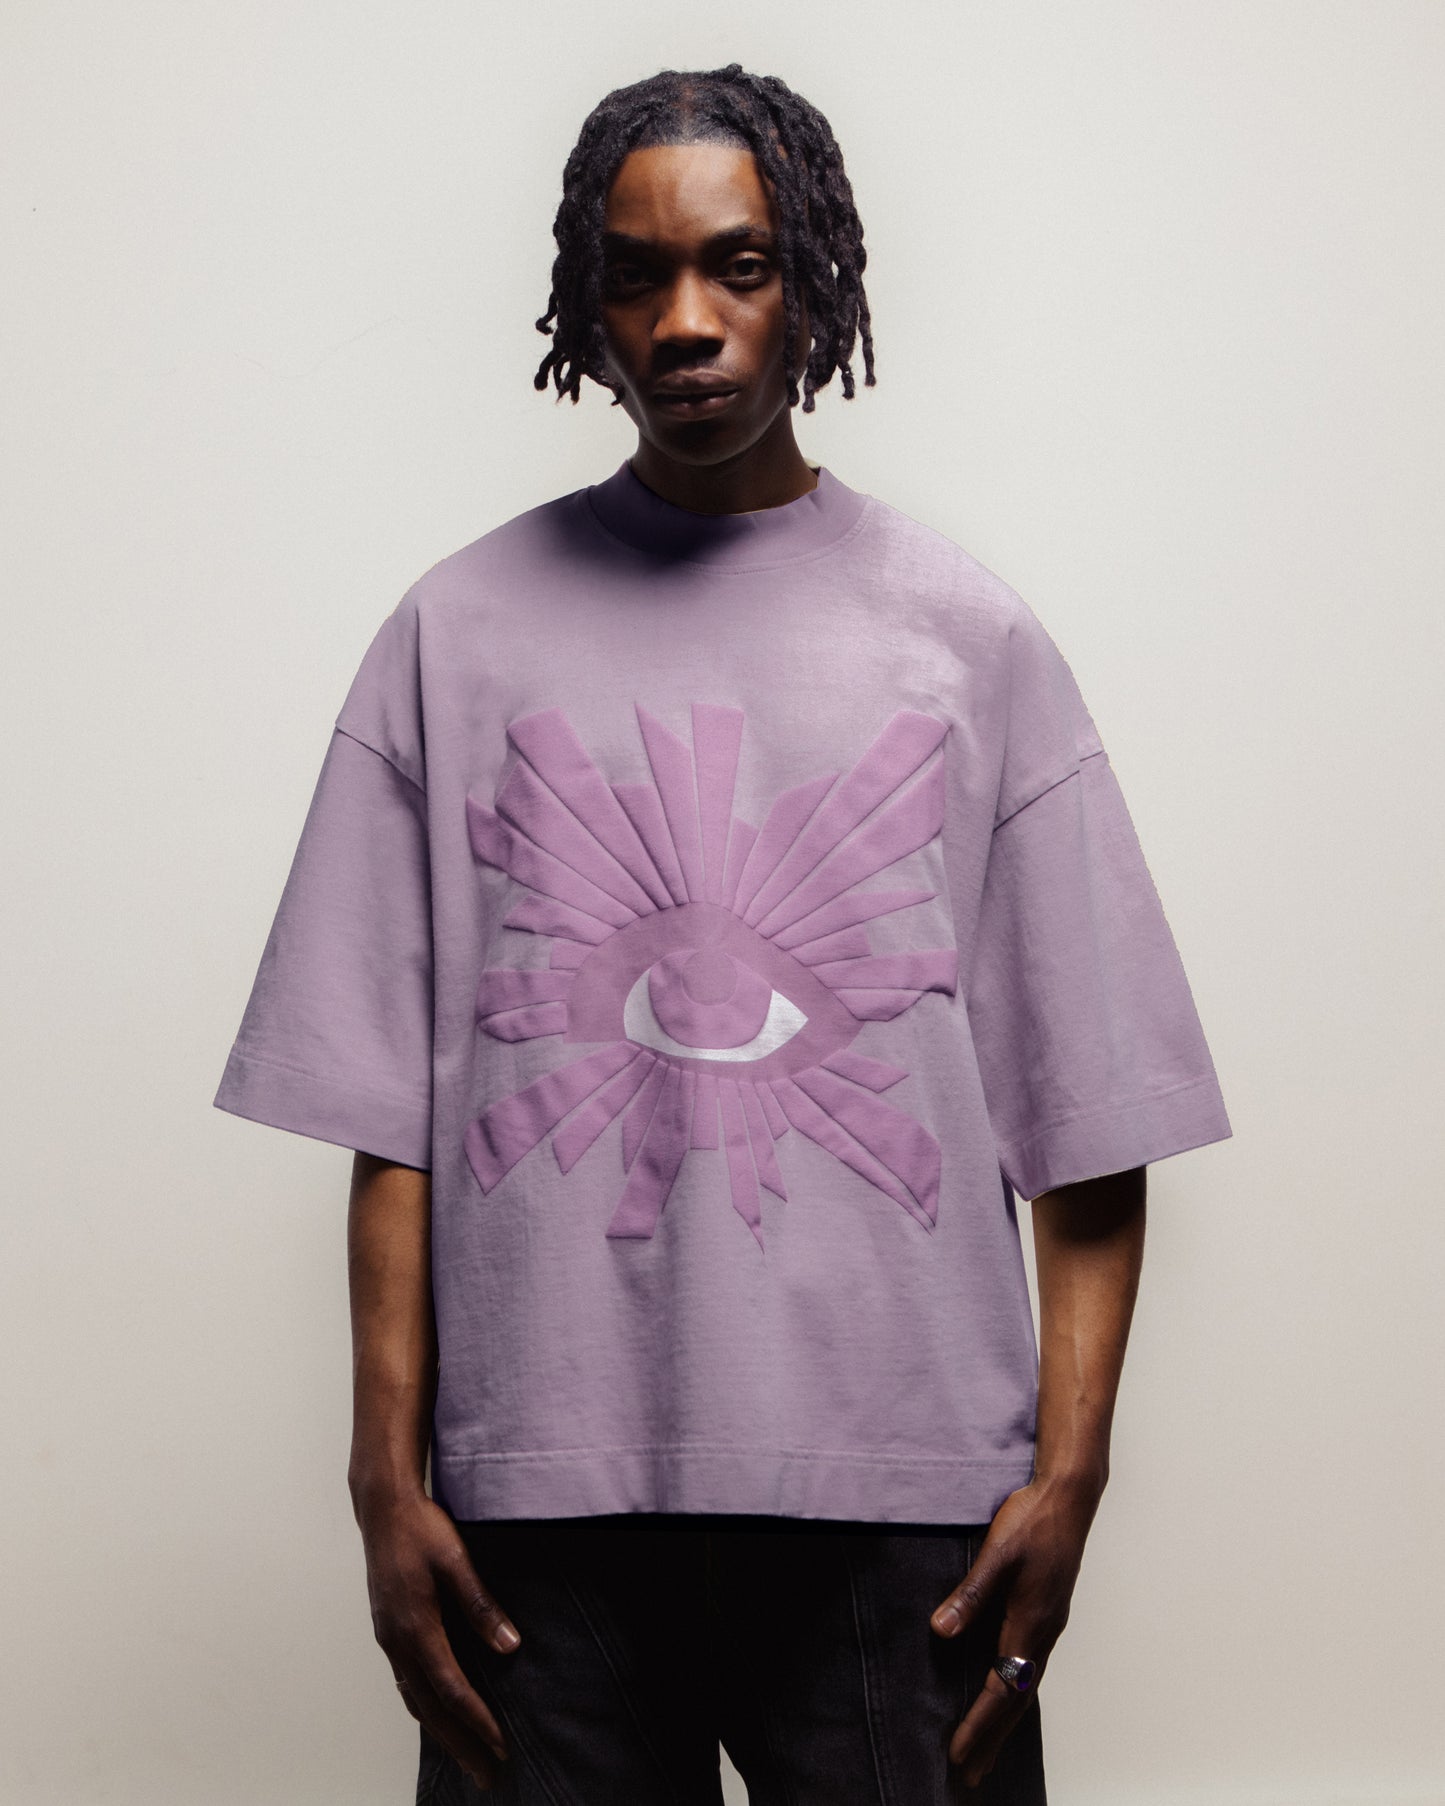 ALL-SEEING HEAVYWEIGHT TEE IN WISTERIA